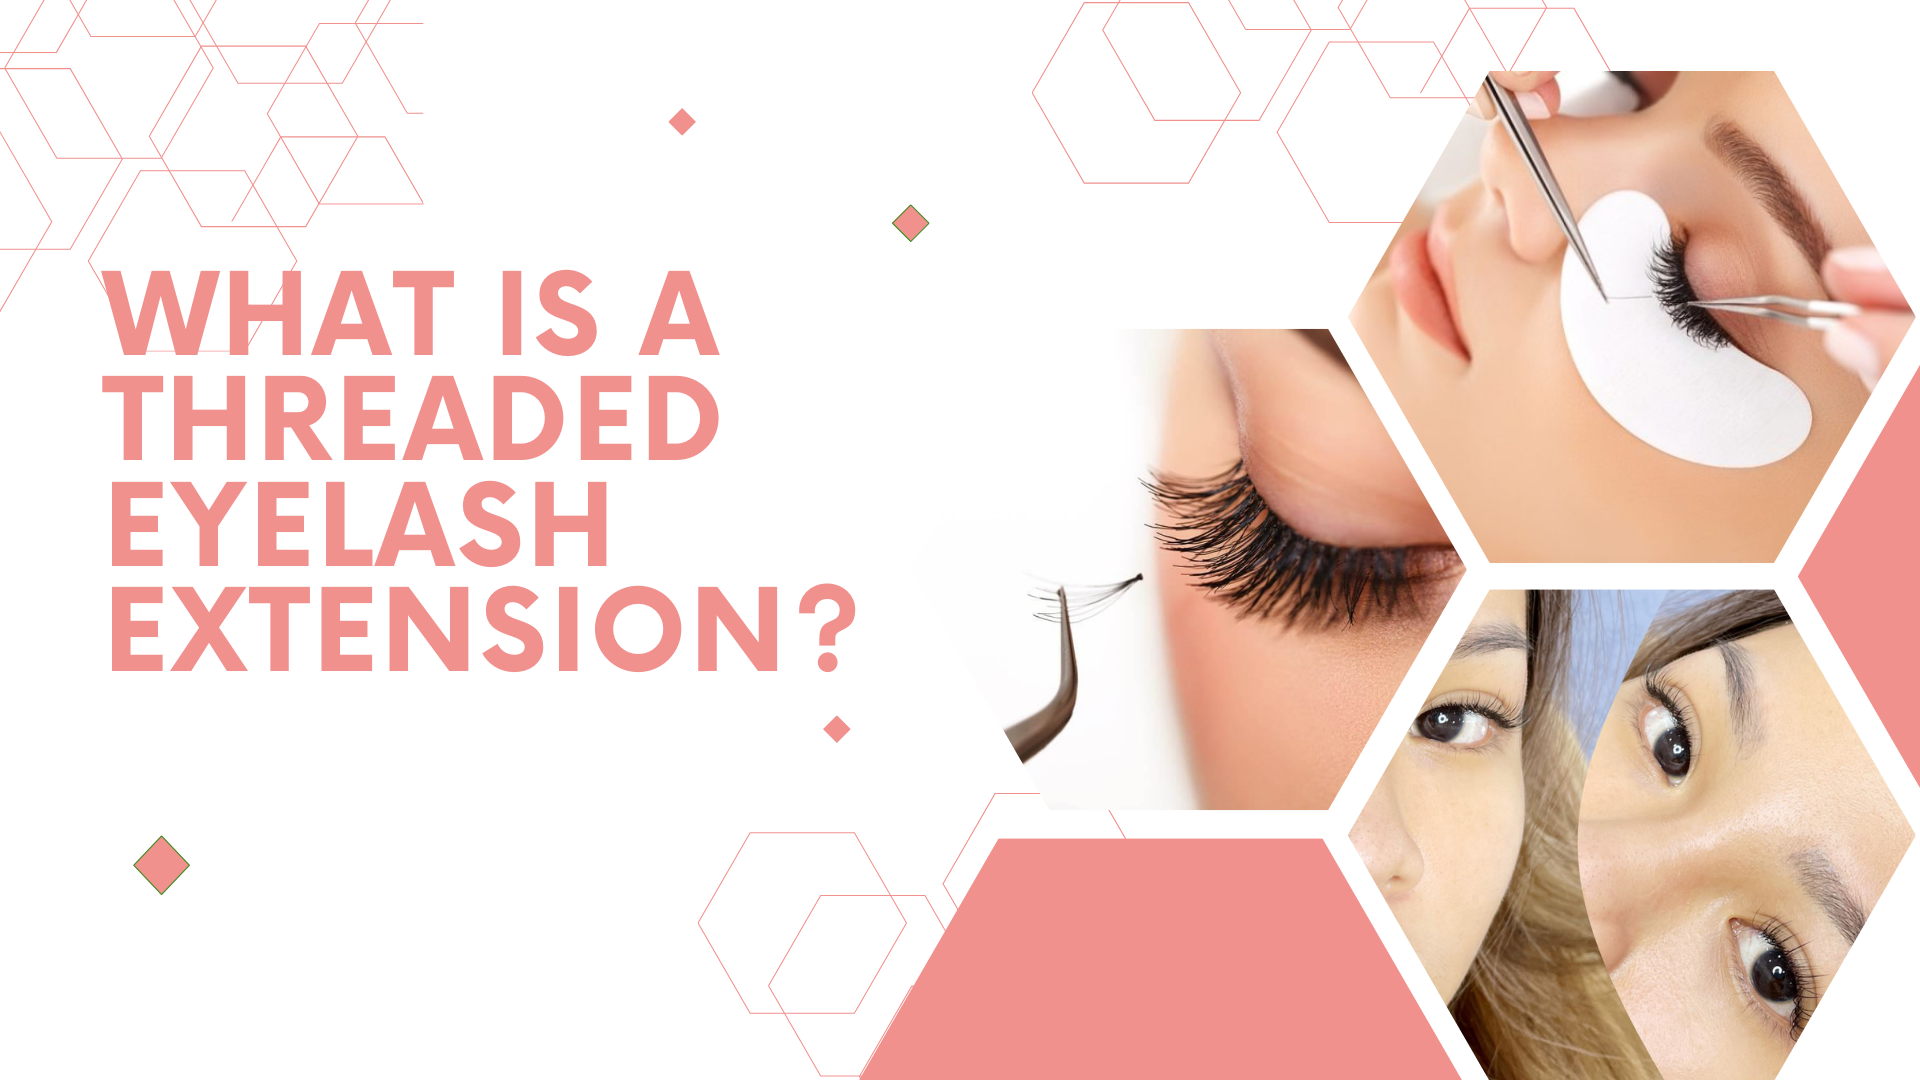 What is a threaded eyelash extension?